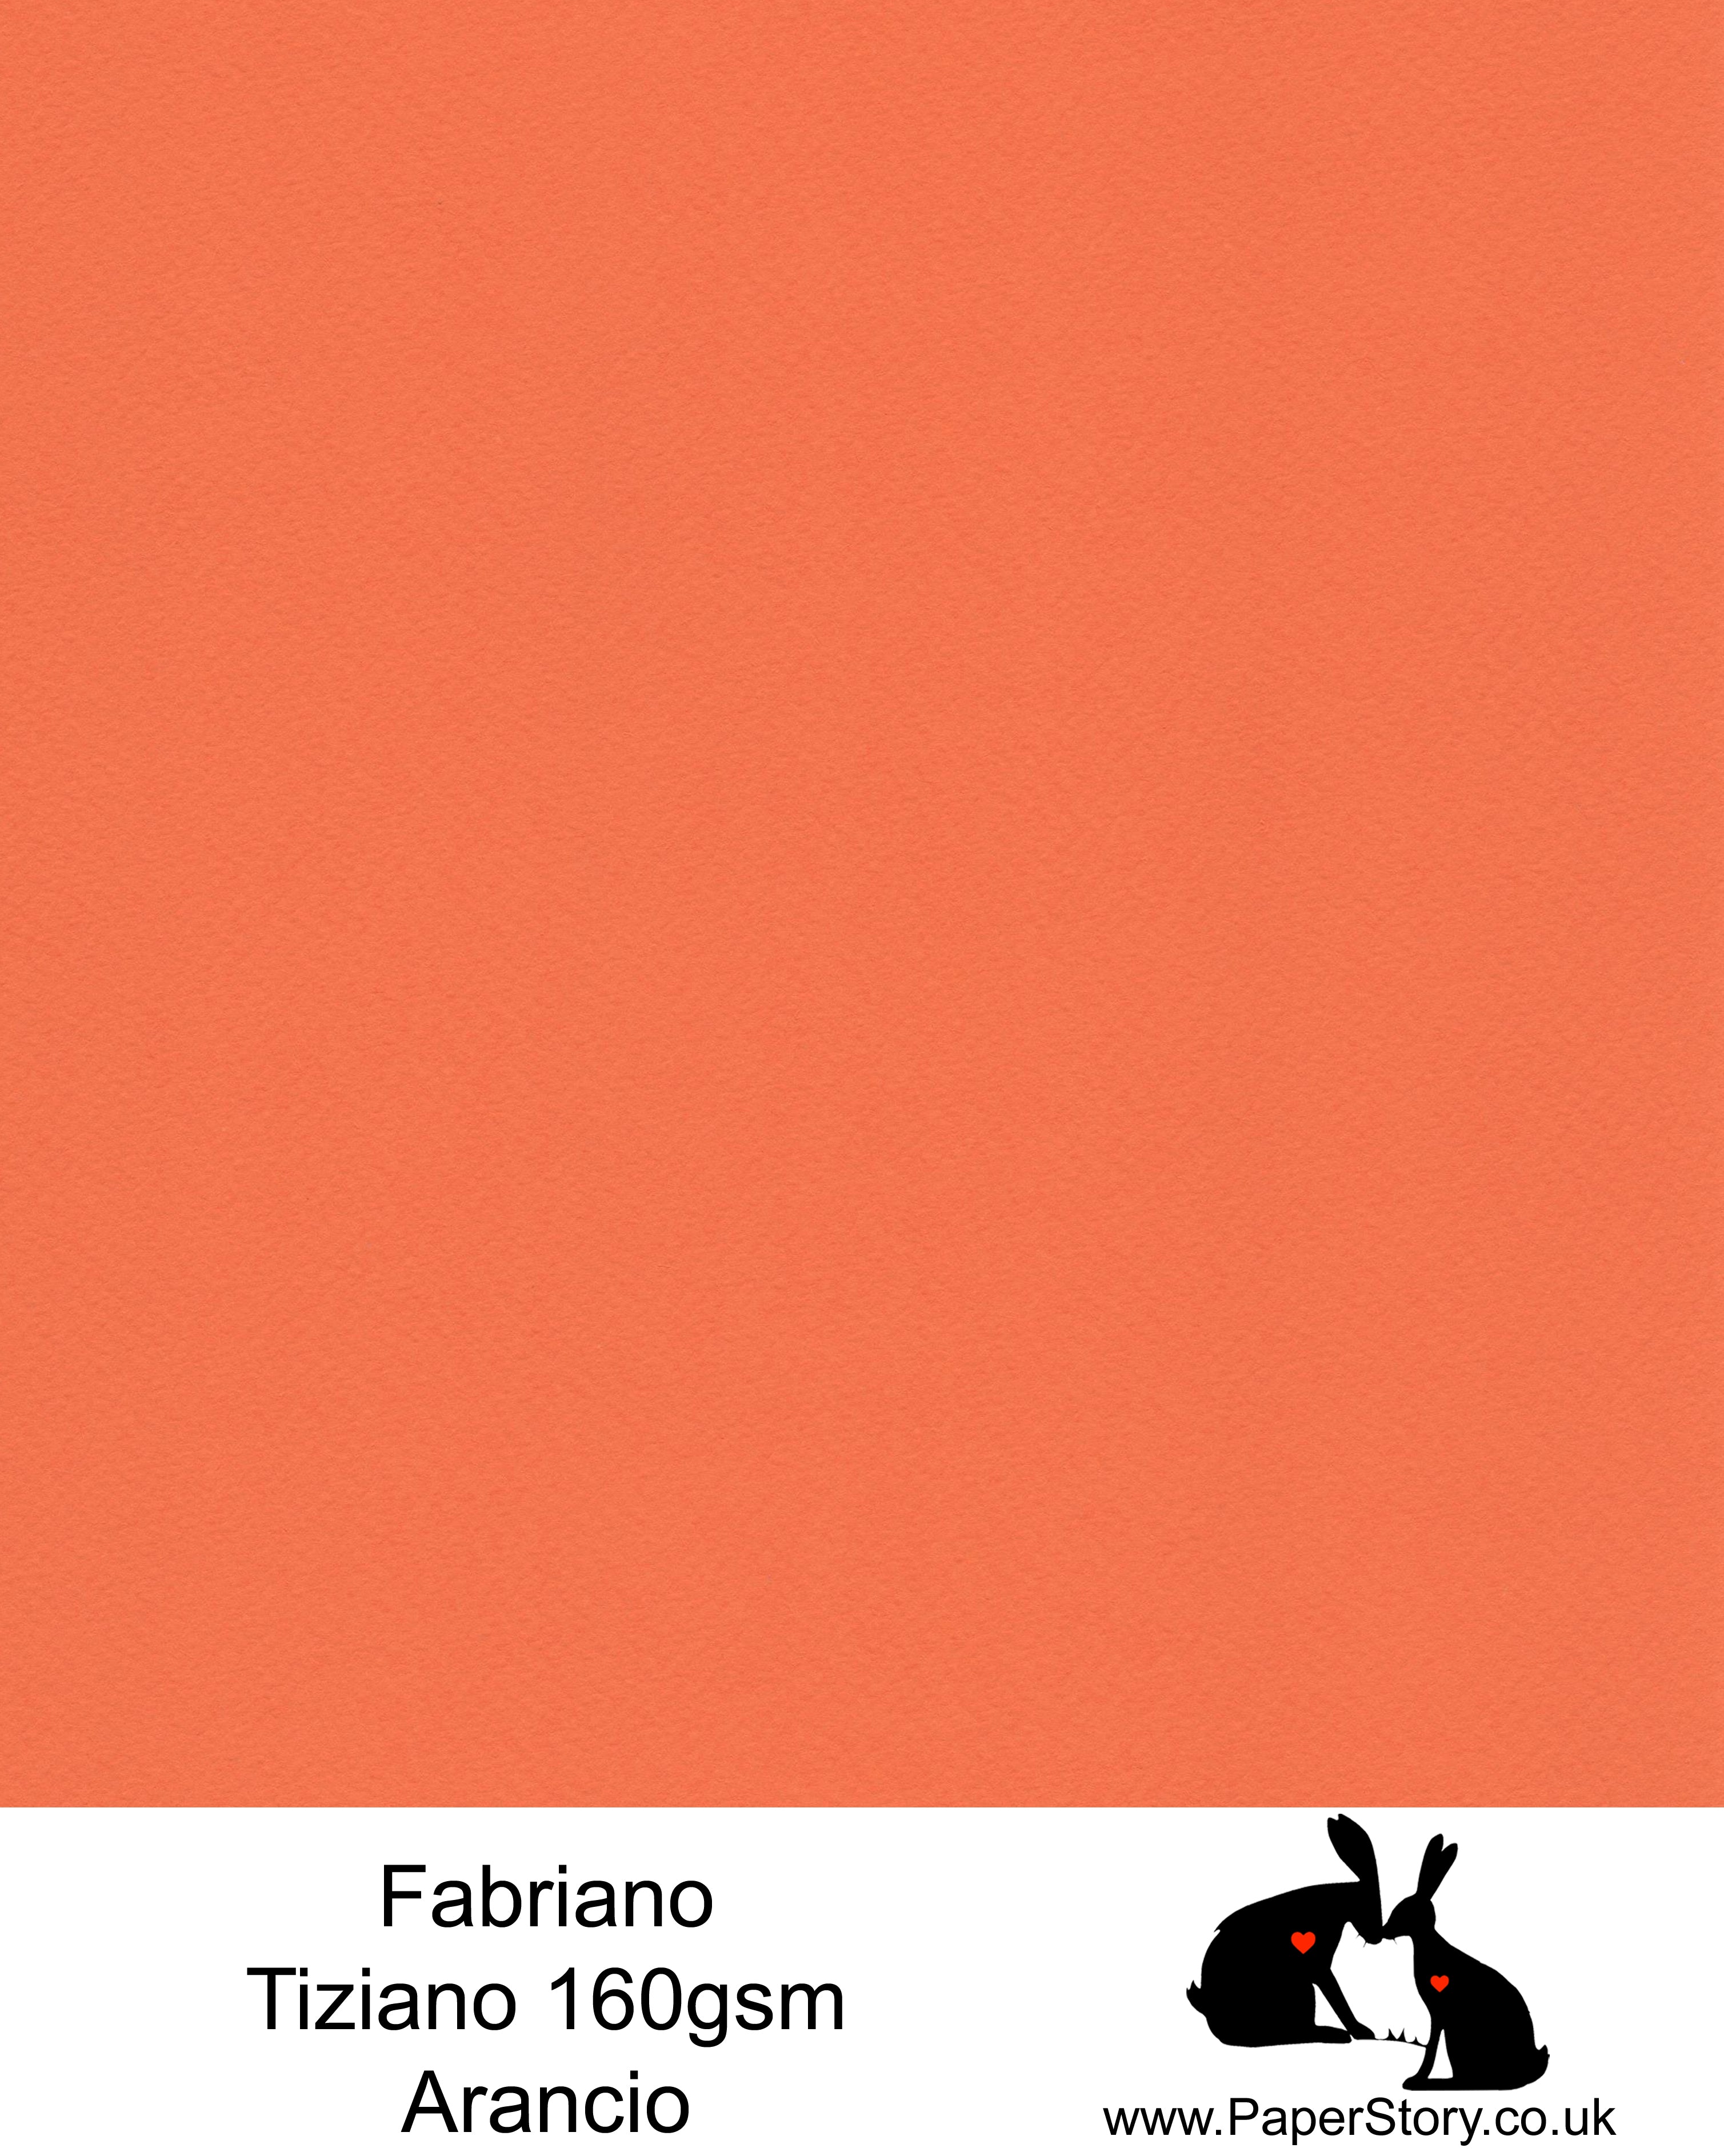 High quality paper from Italy, Arancio Orange Fabriano Tiziano is 160 gsm, Tiziano has a high cotton content, a textured naturally sized surface. This paper is acid free to guarantee long permanence in time, pH neutral. It has highly lightfast colours, an excellent surface making and sizing which make this paper particularly suitable for papercutting, pastels, pencil, graphite, charcoal, tempera, air brush and watercolour techniques. Tiziano can be used for all printing techniques.